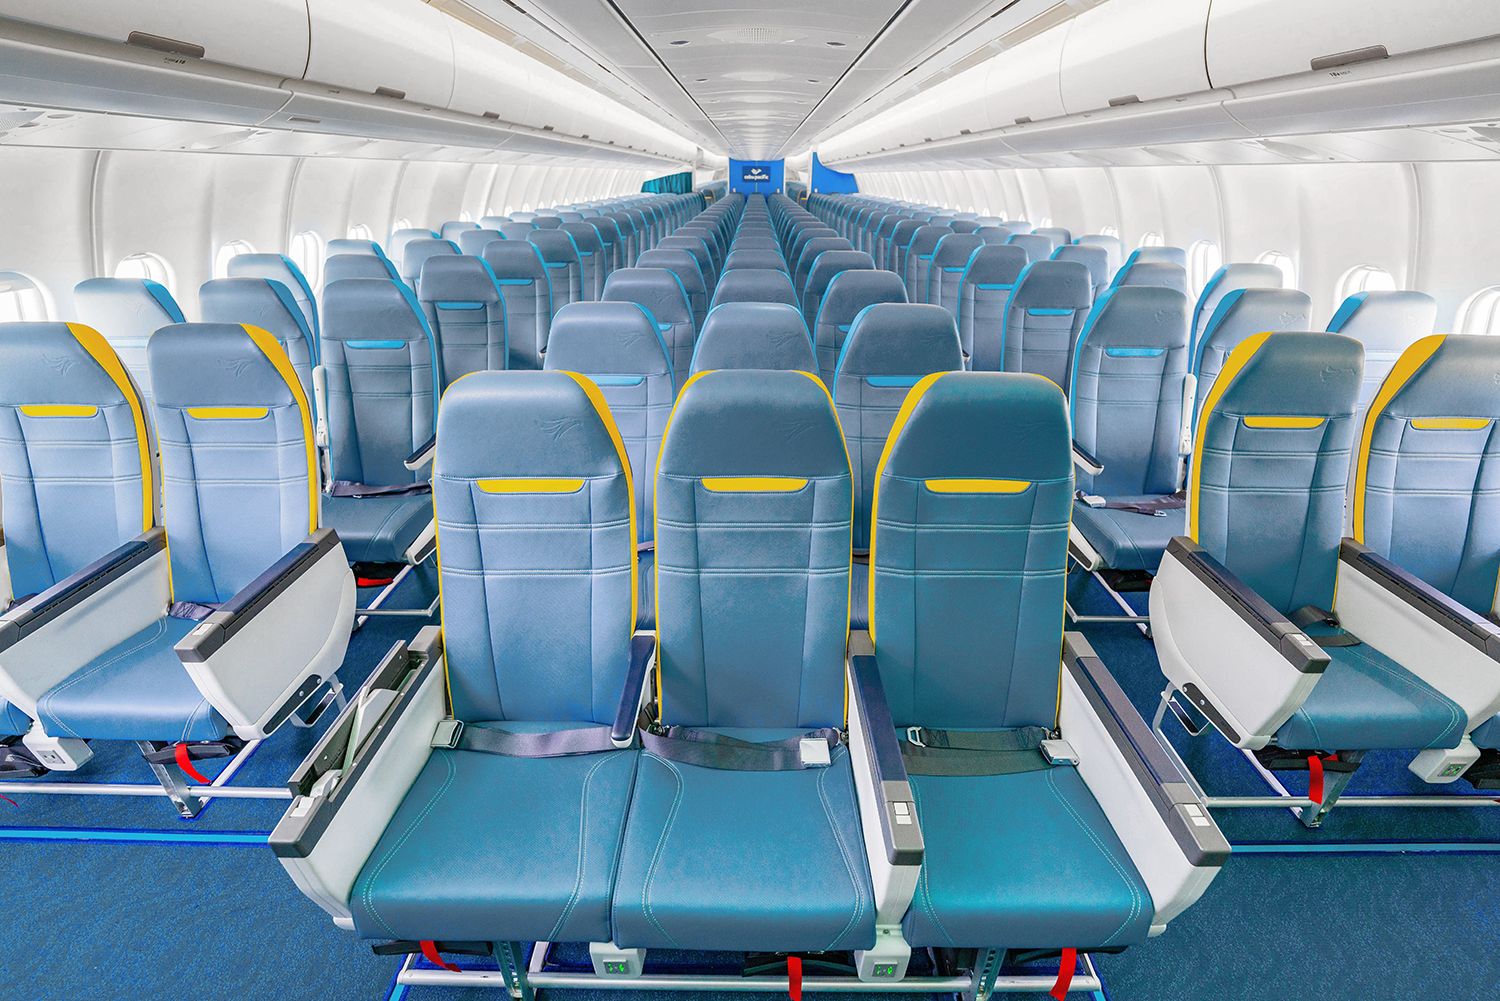 In Pictures: Inside Cebu Pacific's New 460 Seat Airbus A330-900neo